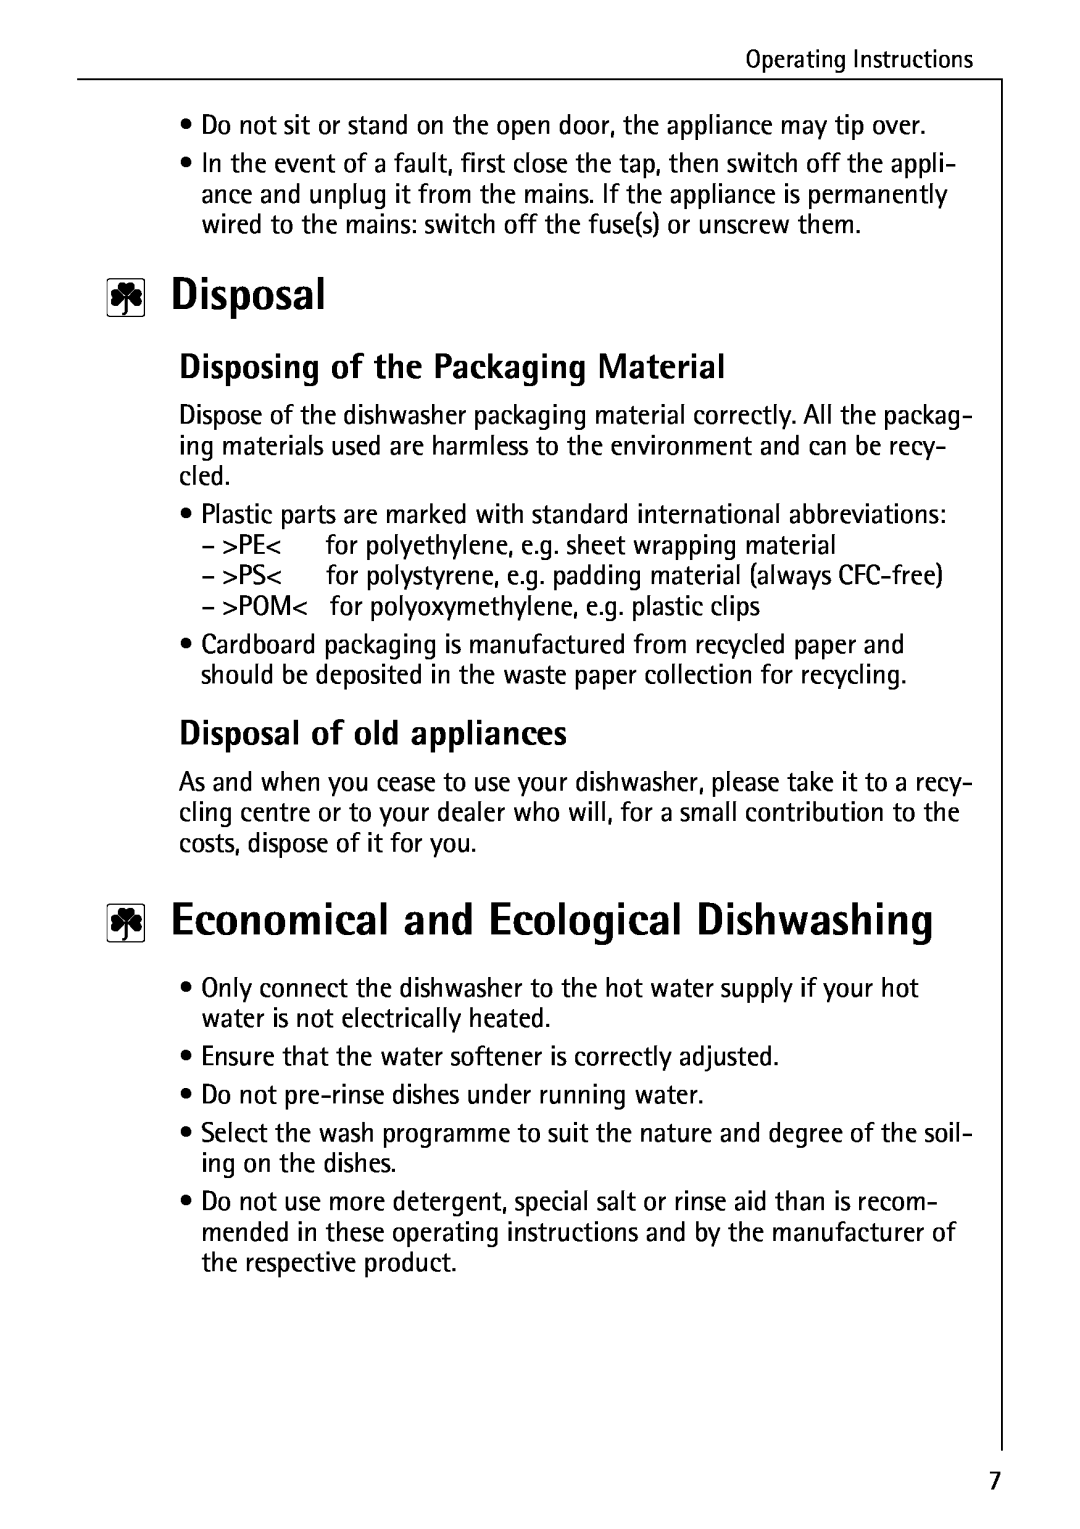 AEG 33060 I manual Disposal, Economical and Ecological Dishwashing, Disposing of the Packaging Material 